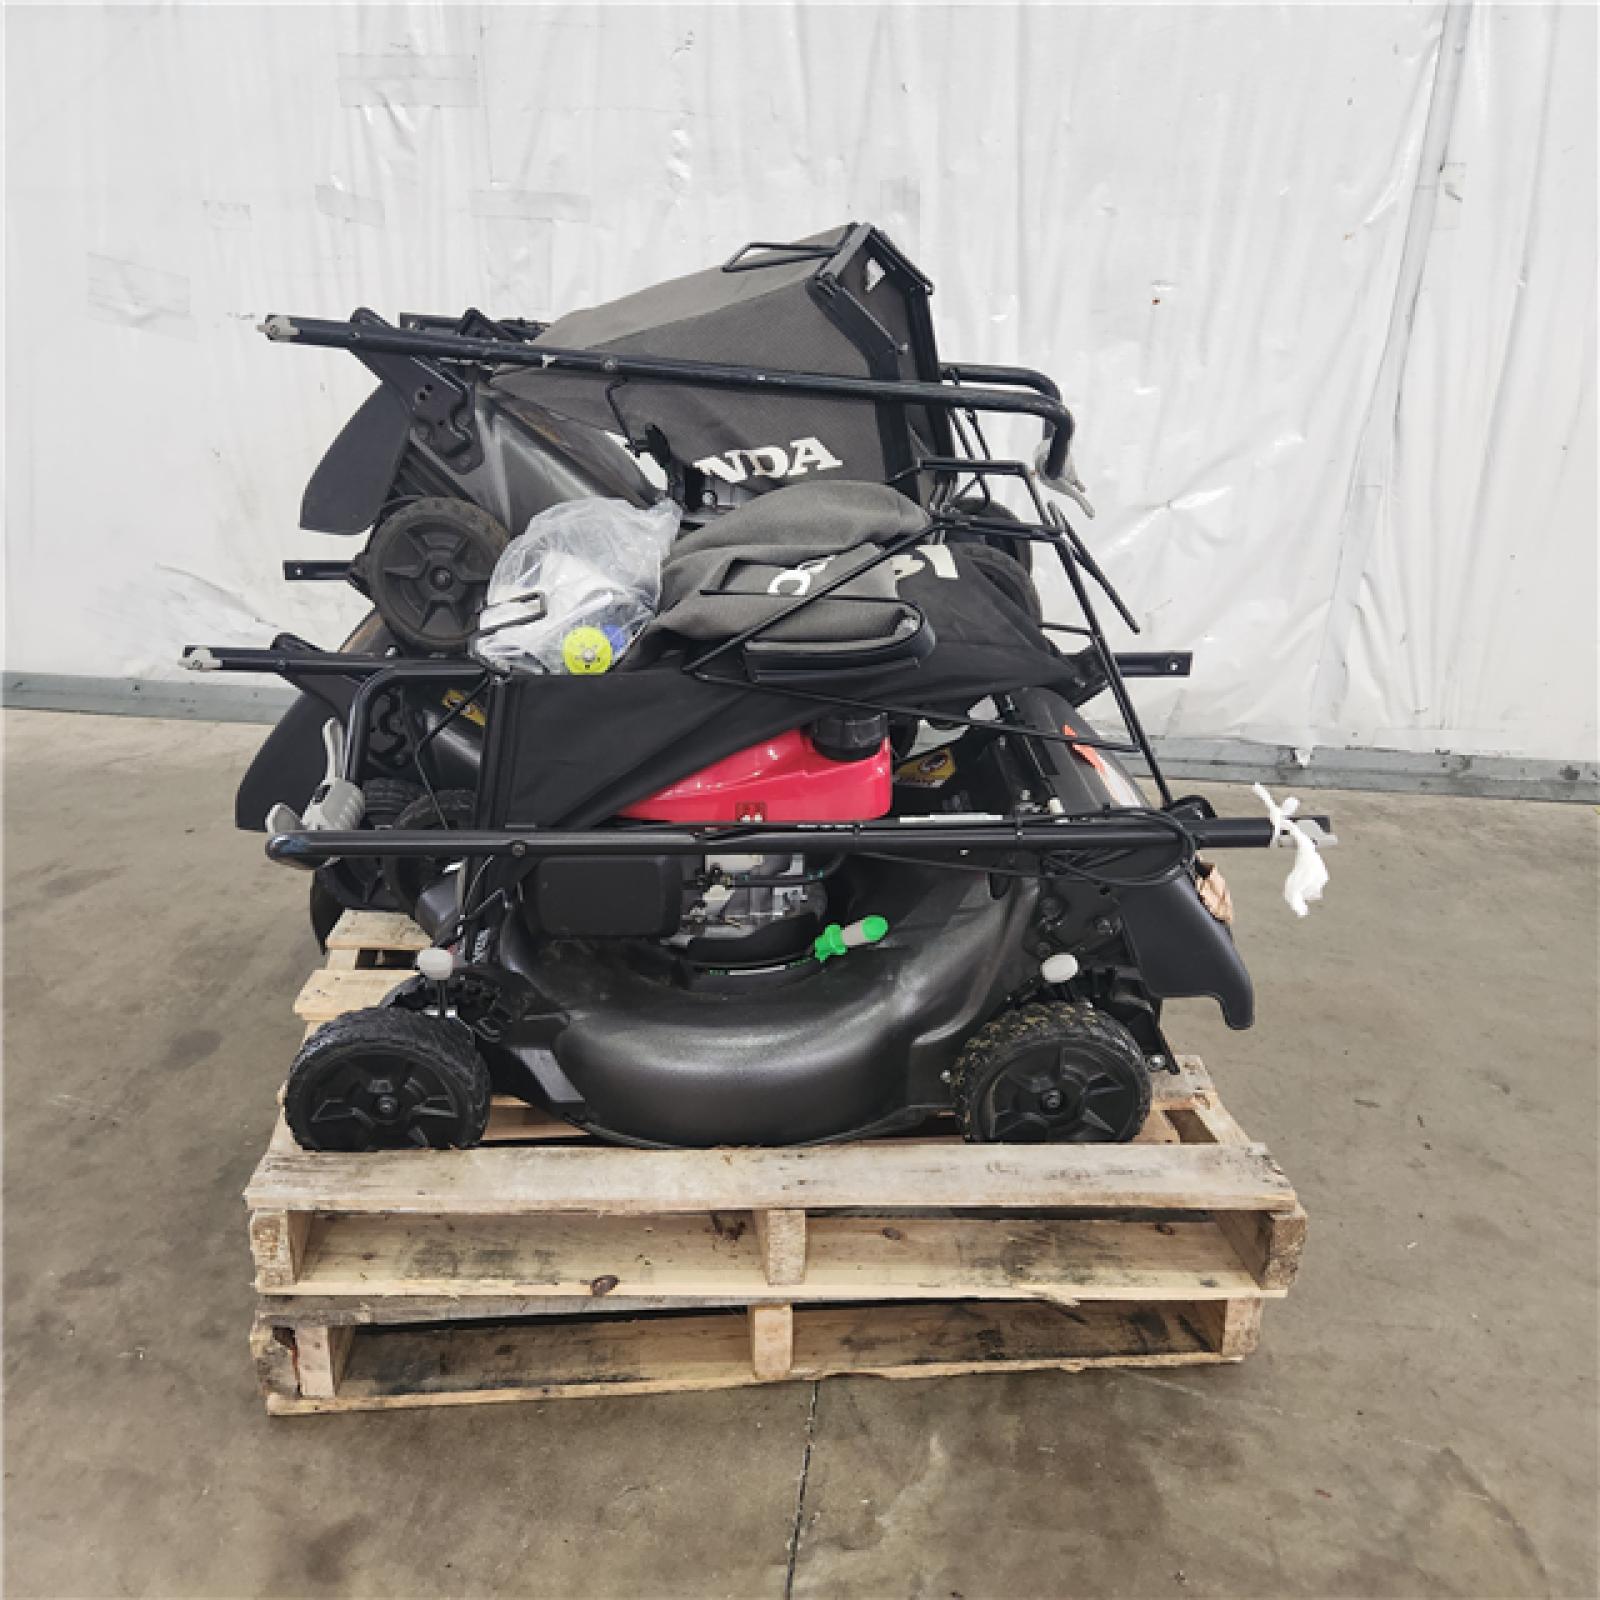 Houston Location - AS-IS Outdoor Power Equipment (3 Honda Mower In Good Condition)